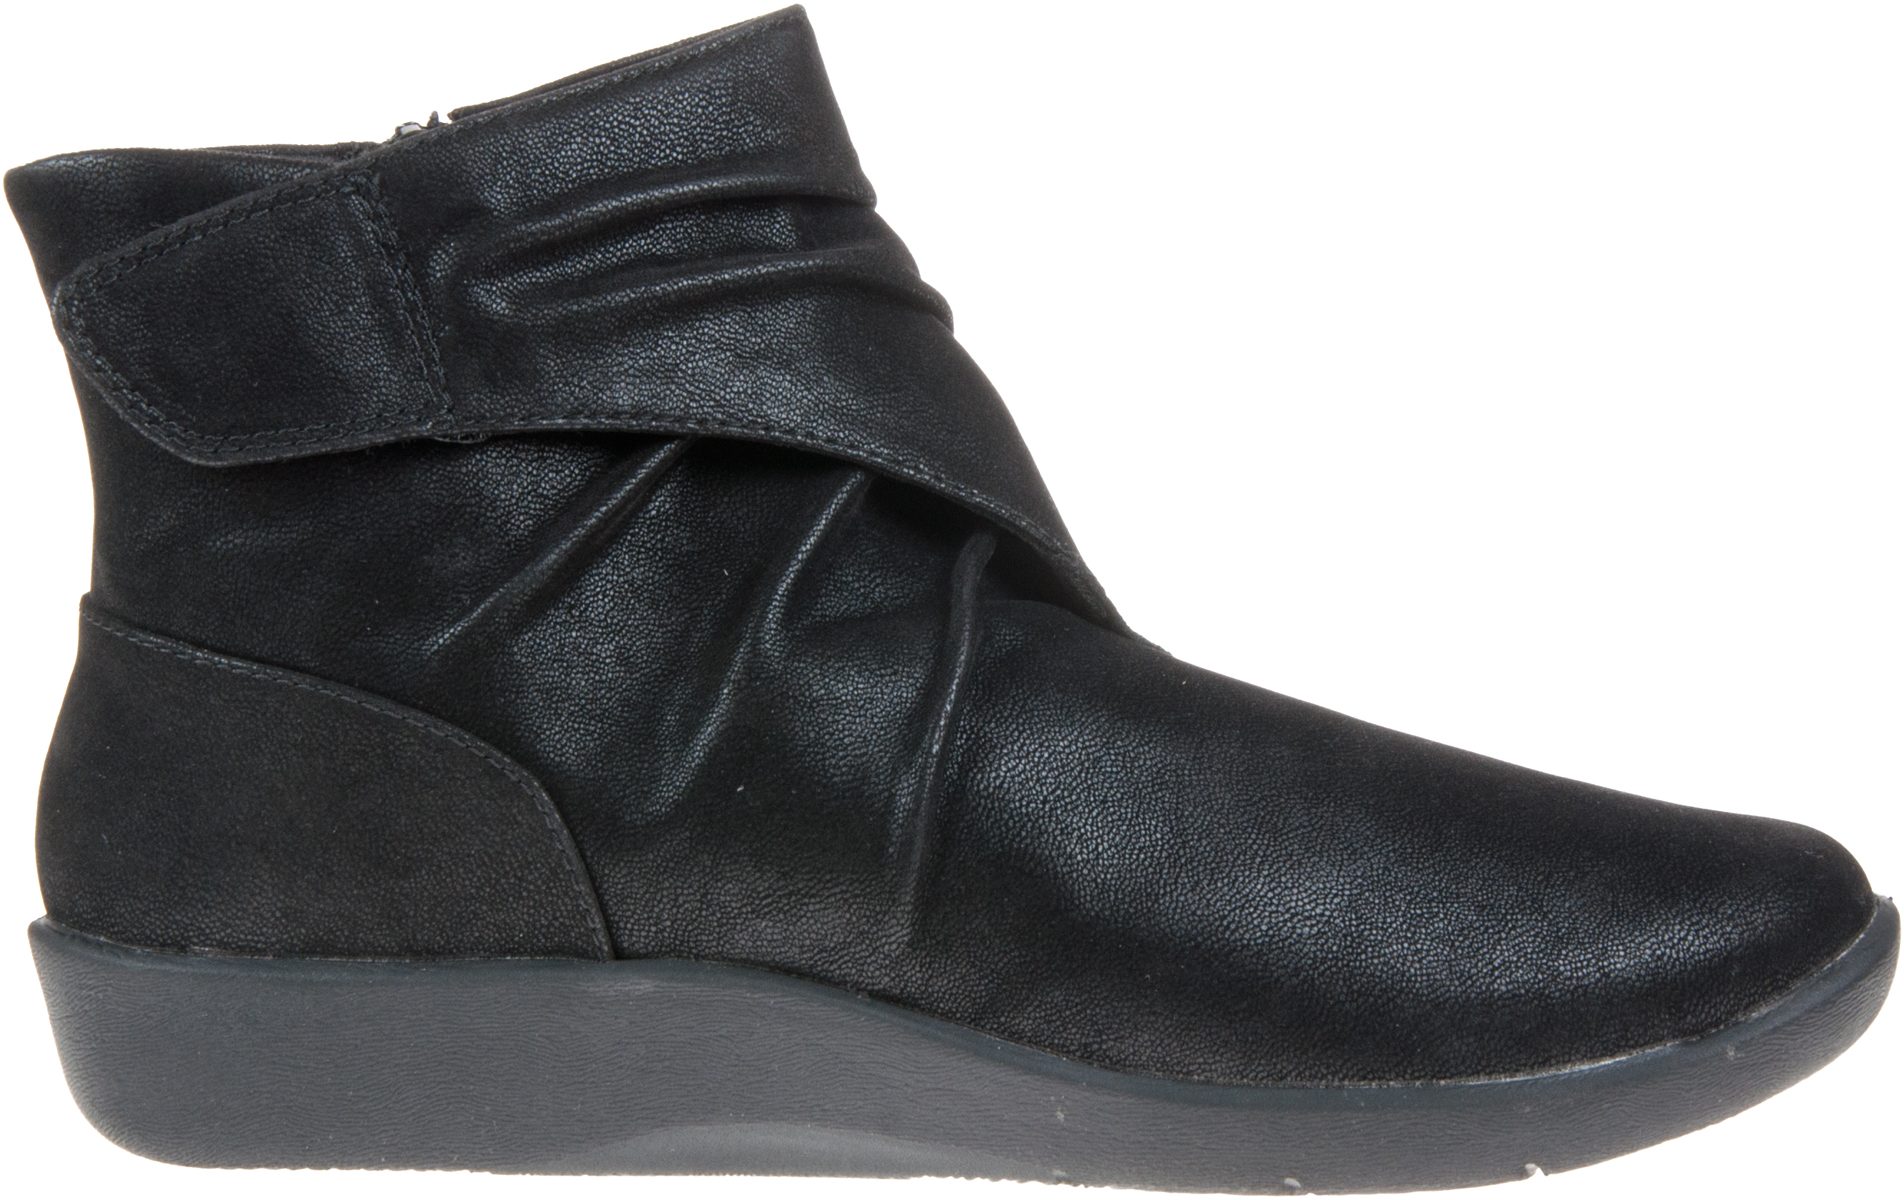 Clarks Sillian Tana Black Synthetic 26137566 - Ankle Boots - Humphries ...